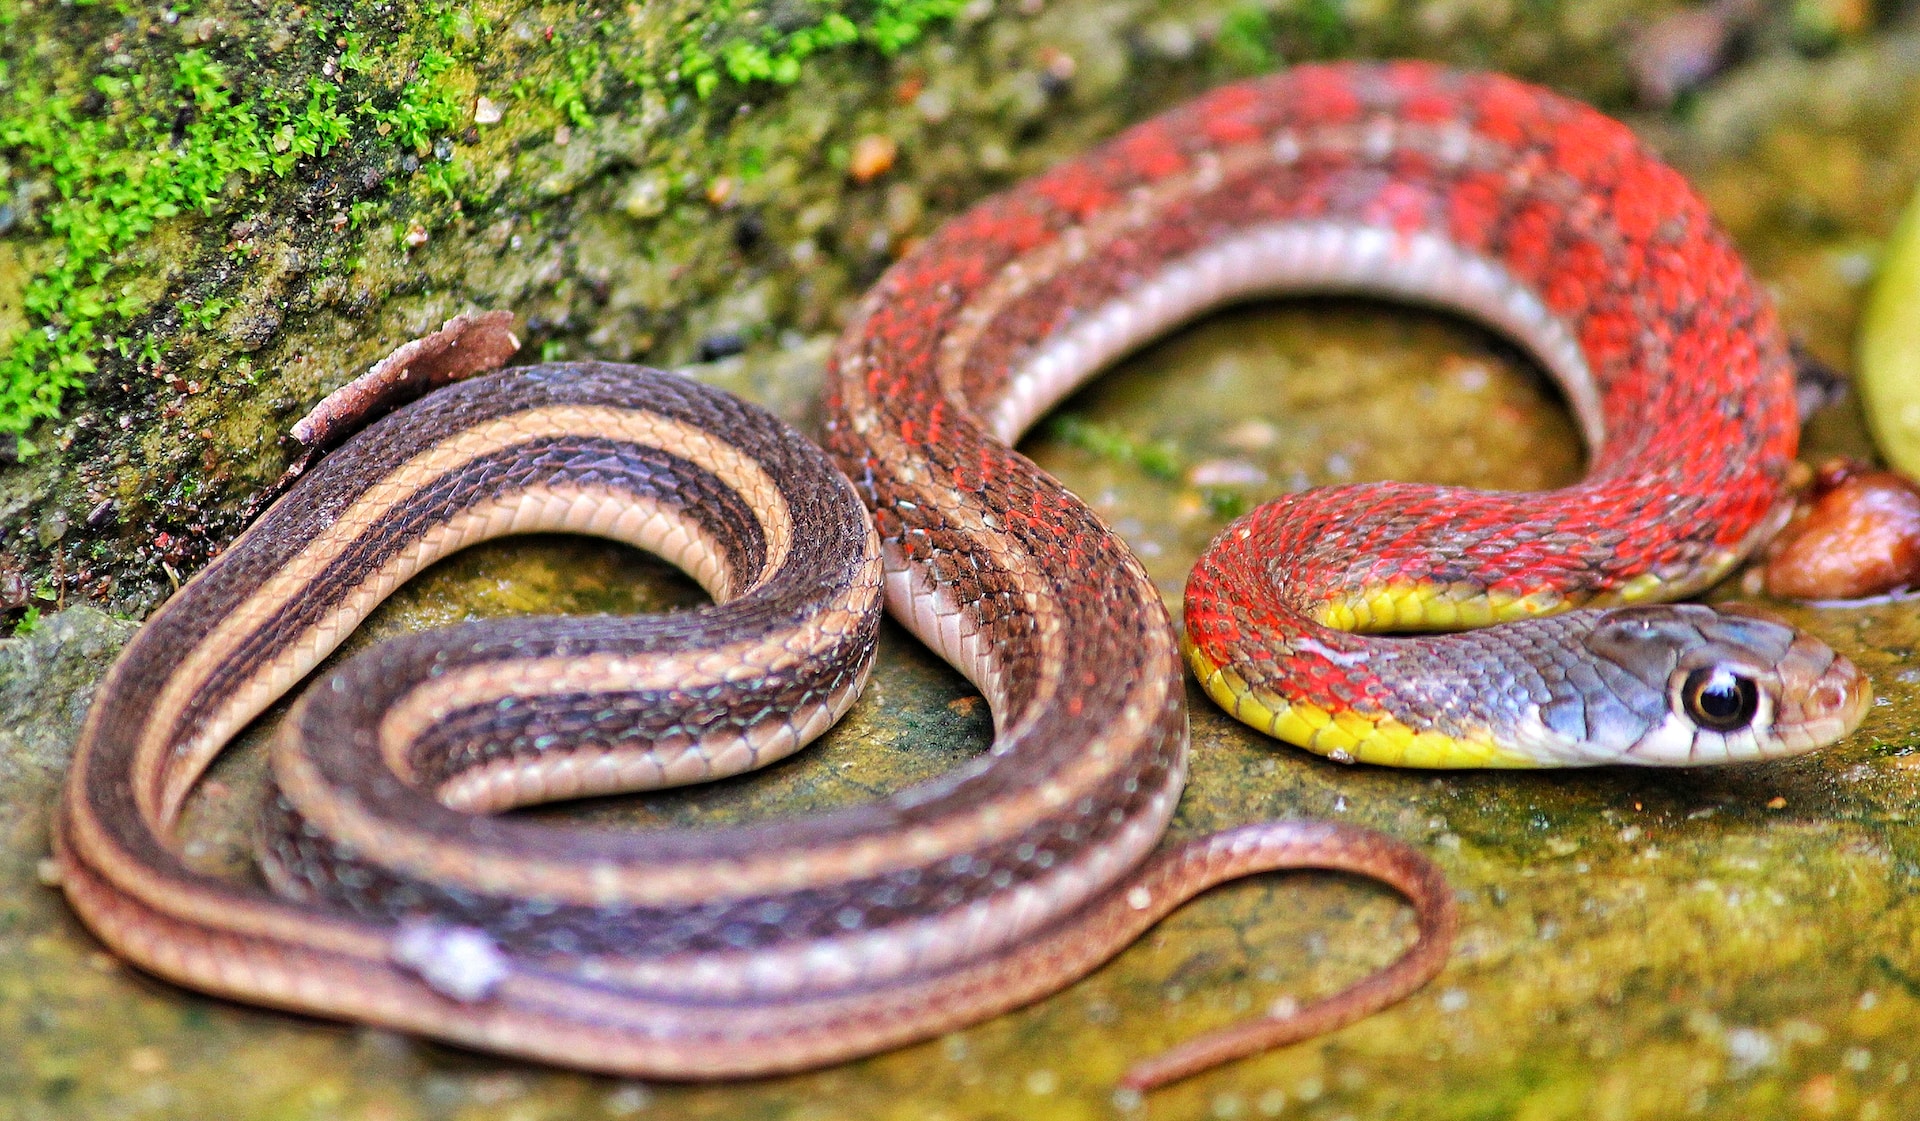 Learn all about the water snakes in Virginia and which ones you should be careful of.